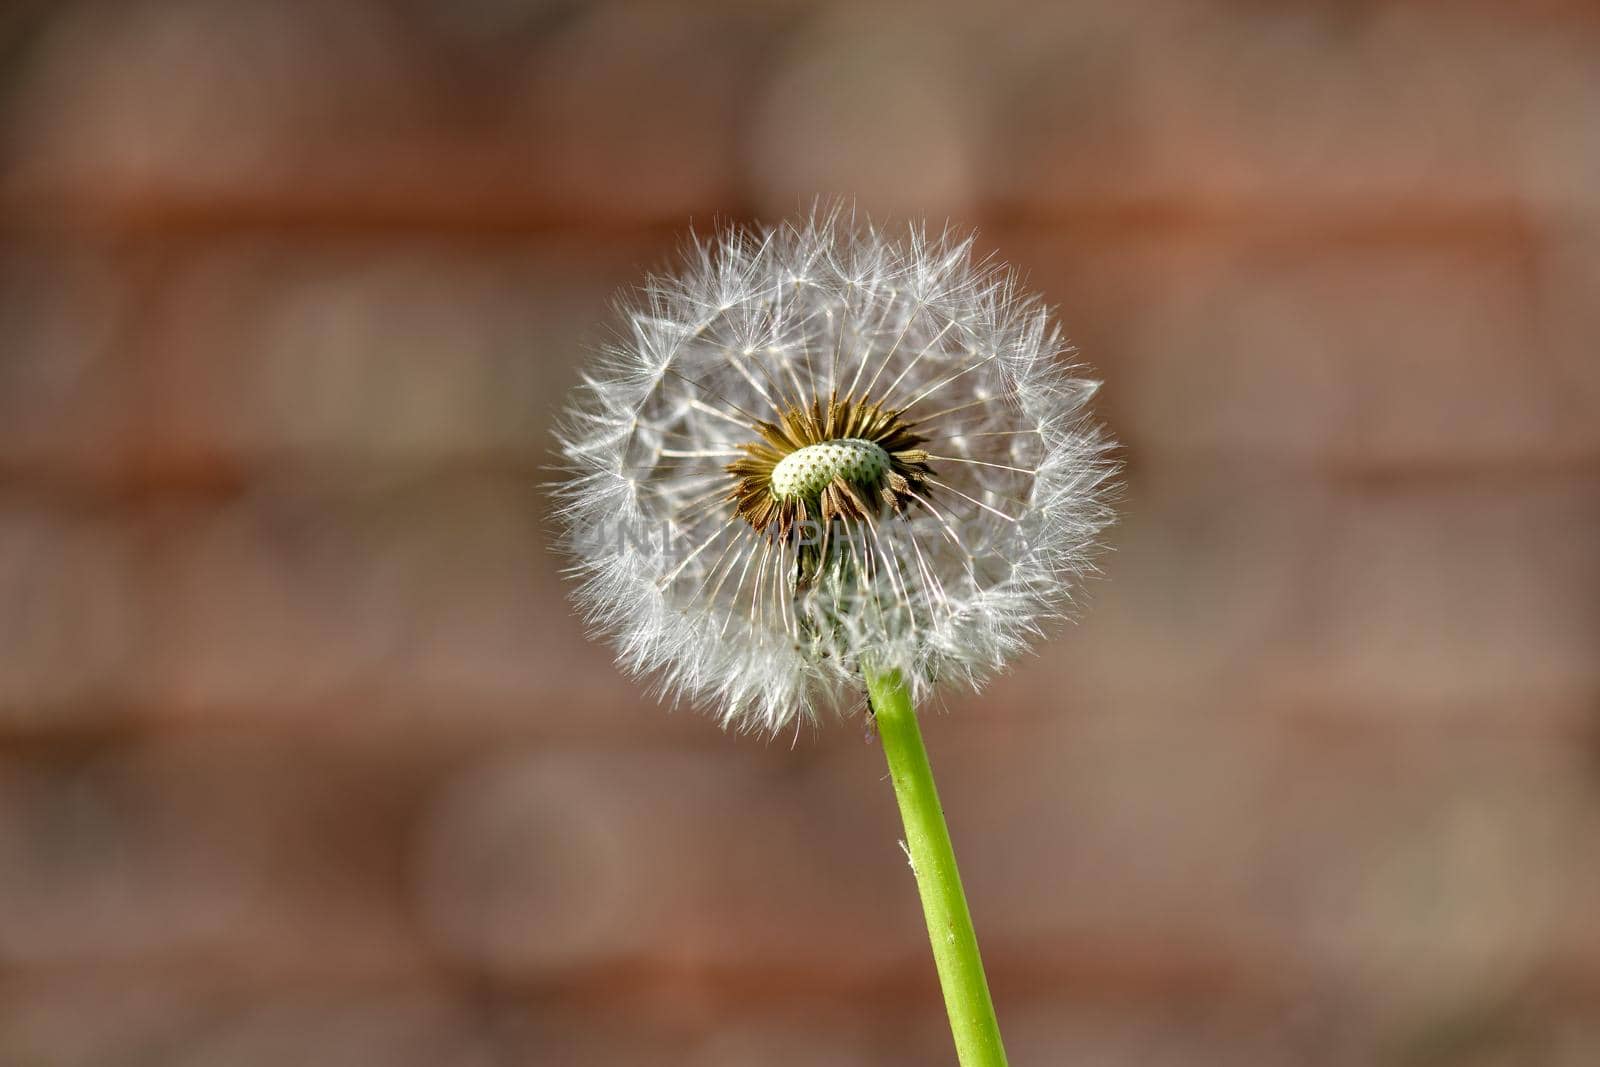 A single withered dandelion flower against an undefined and blurry brownish background in the warm sunlight.